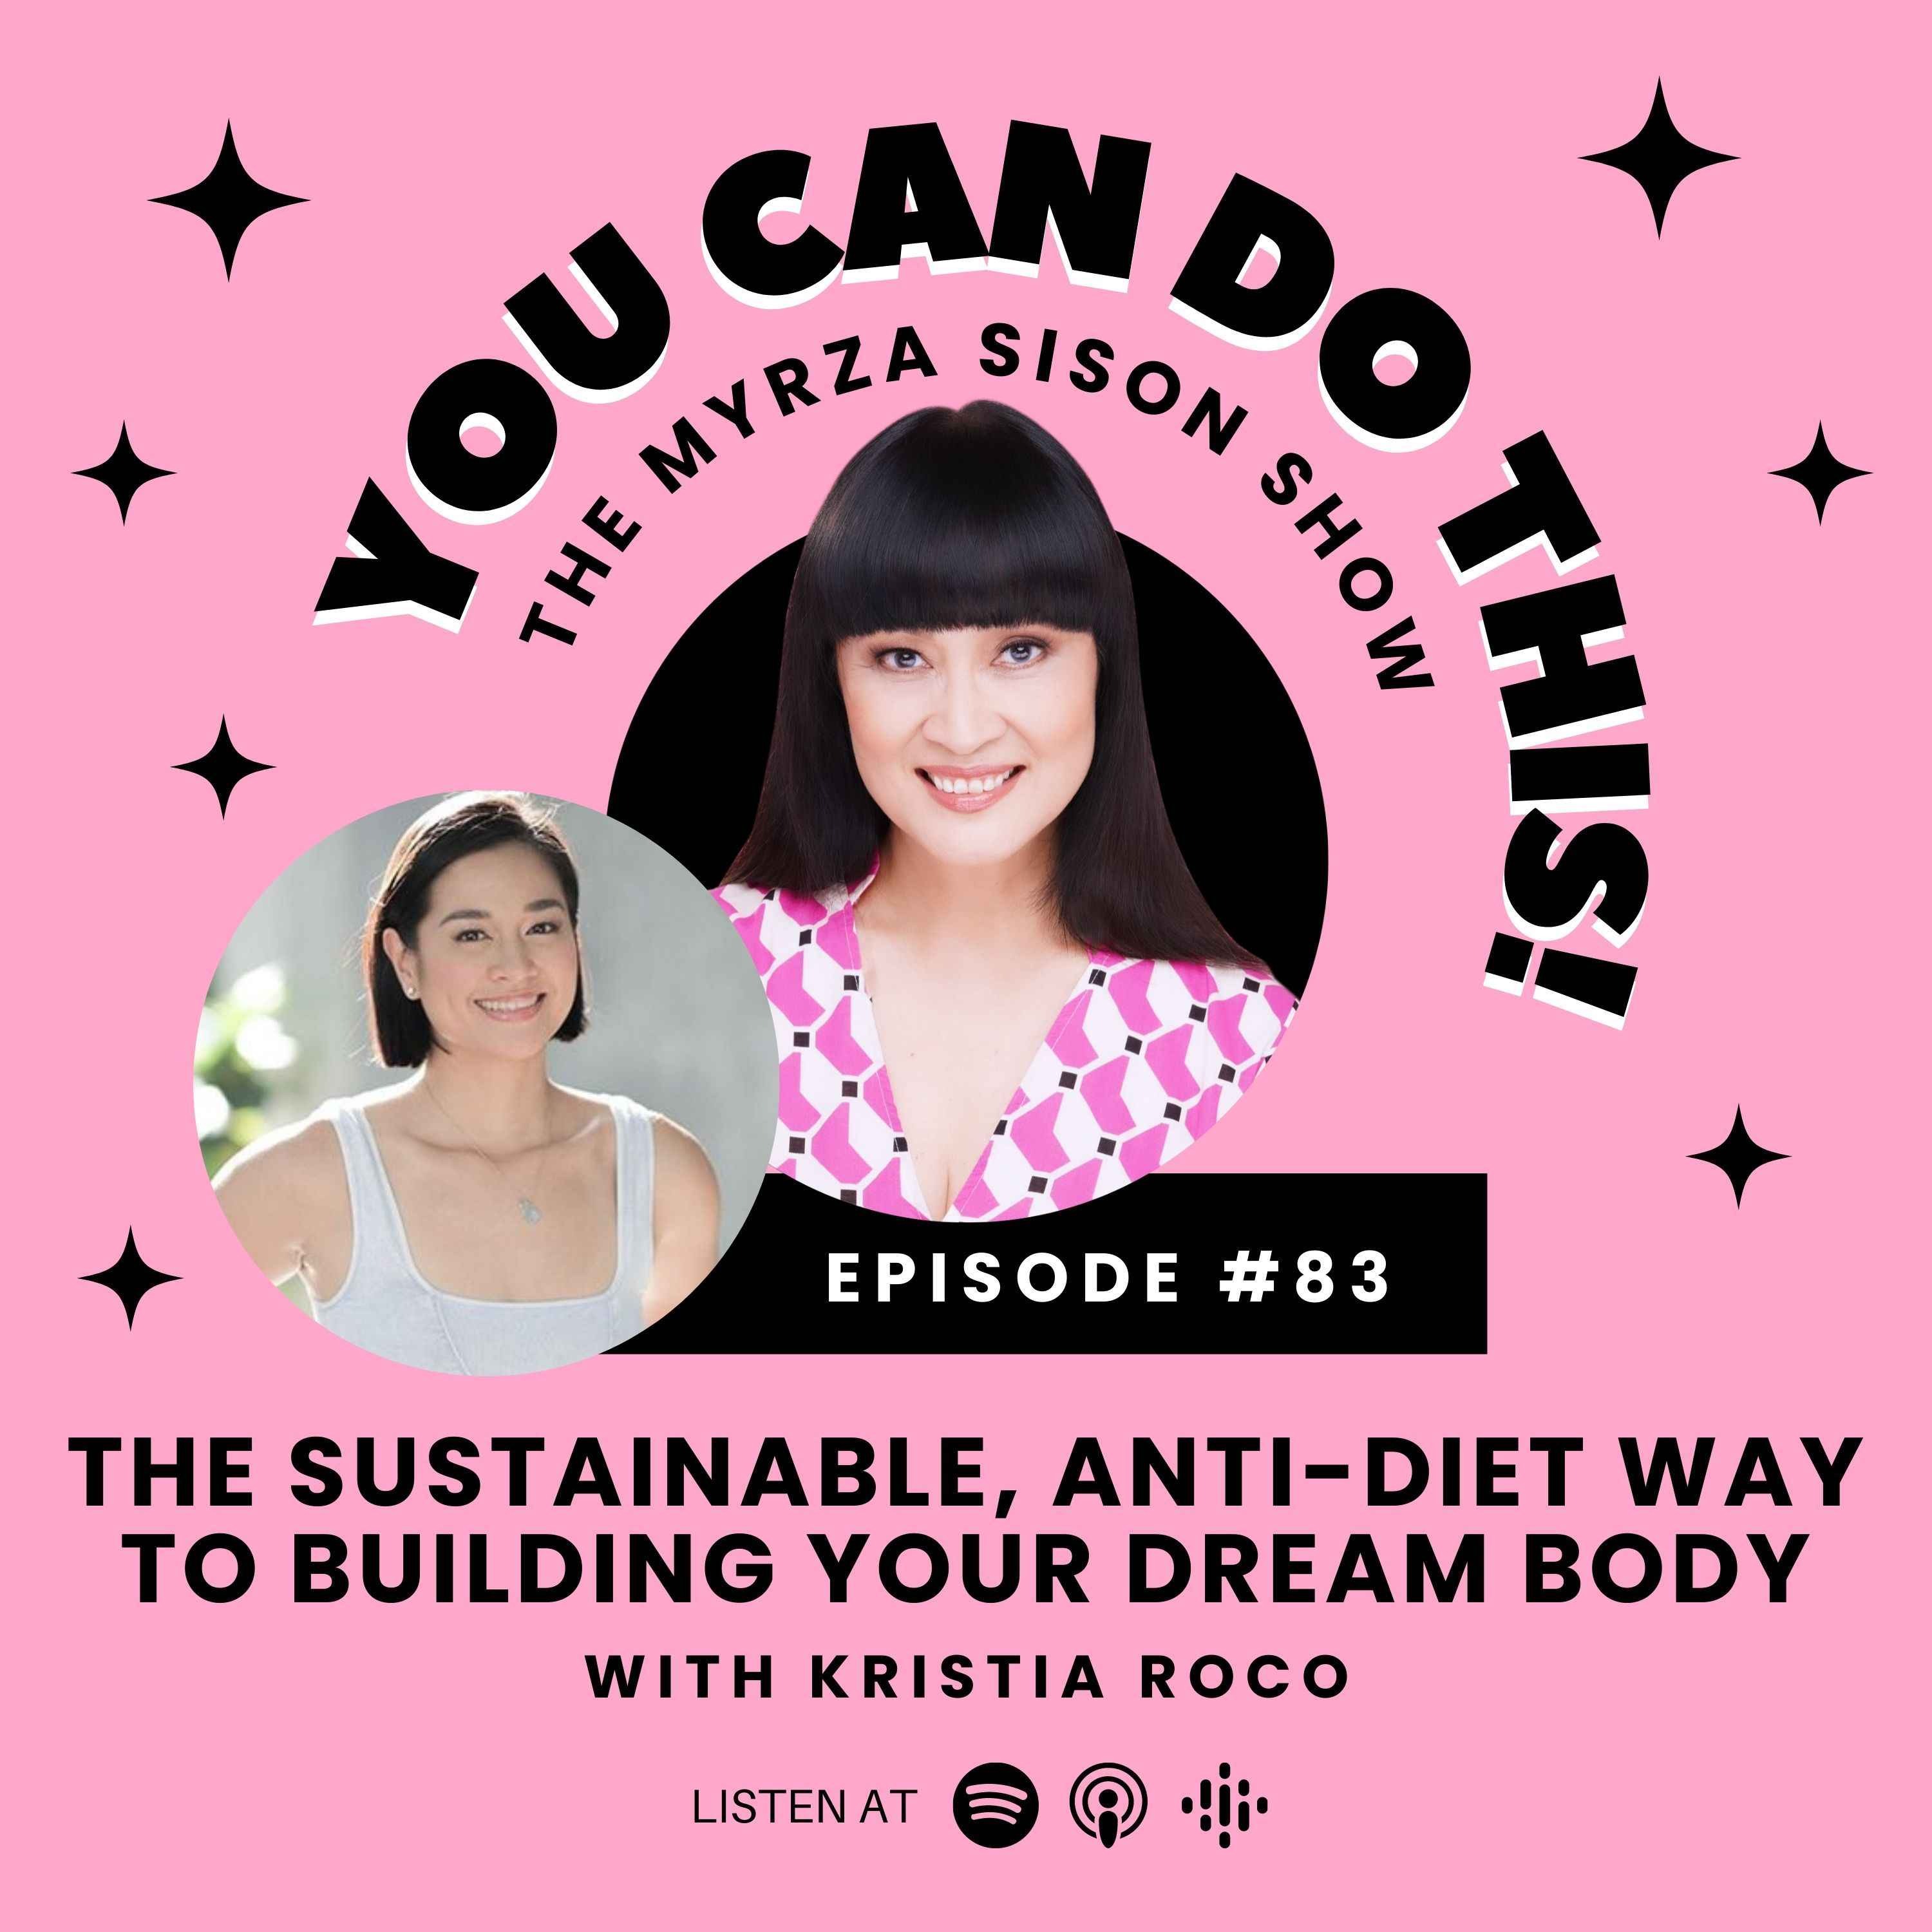 Ep. 83: The Sustainable, Anti-Diet Way to Building Your Dream Body With Kristia Roco